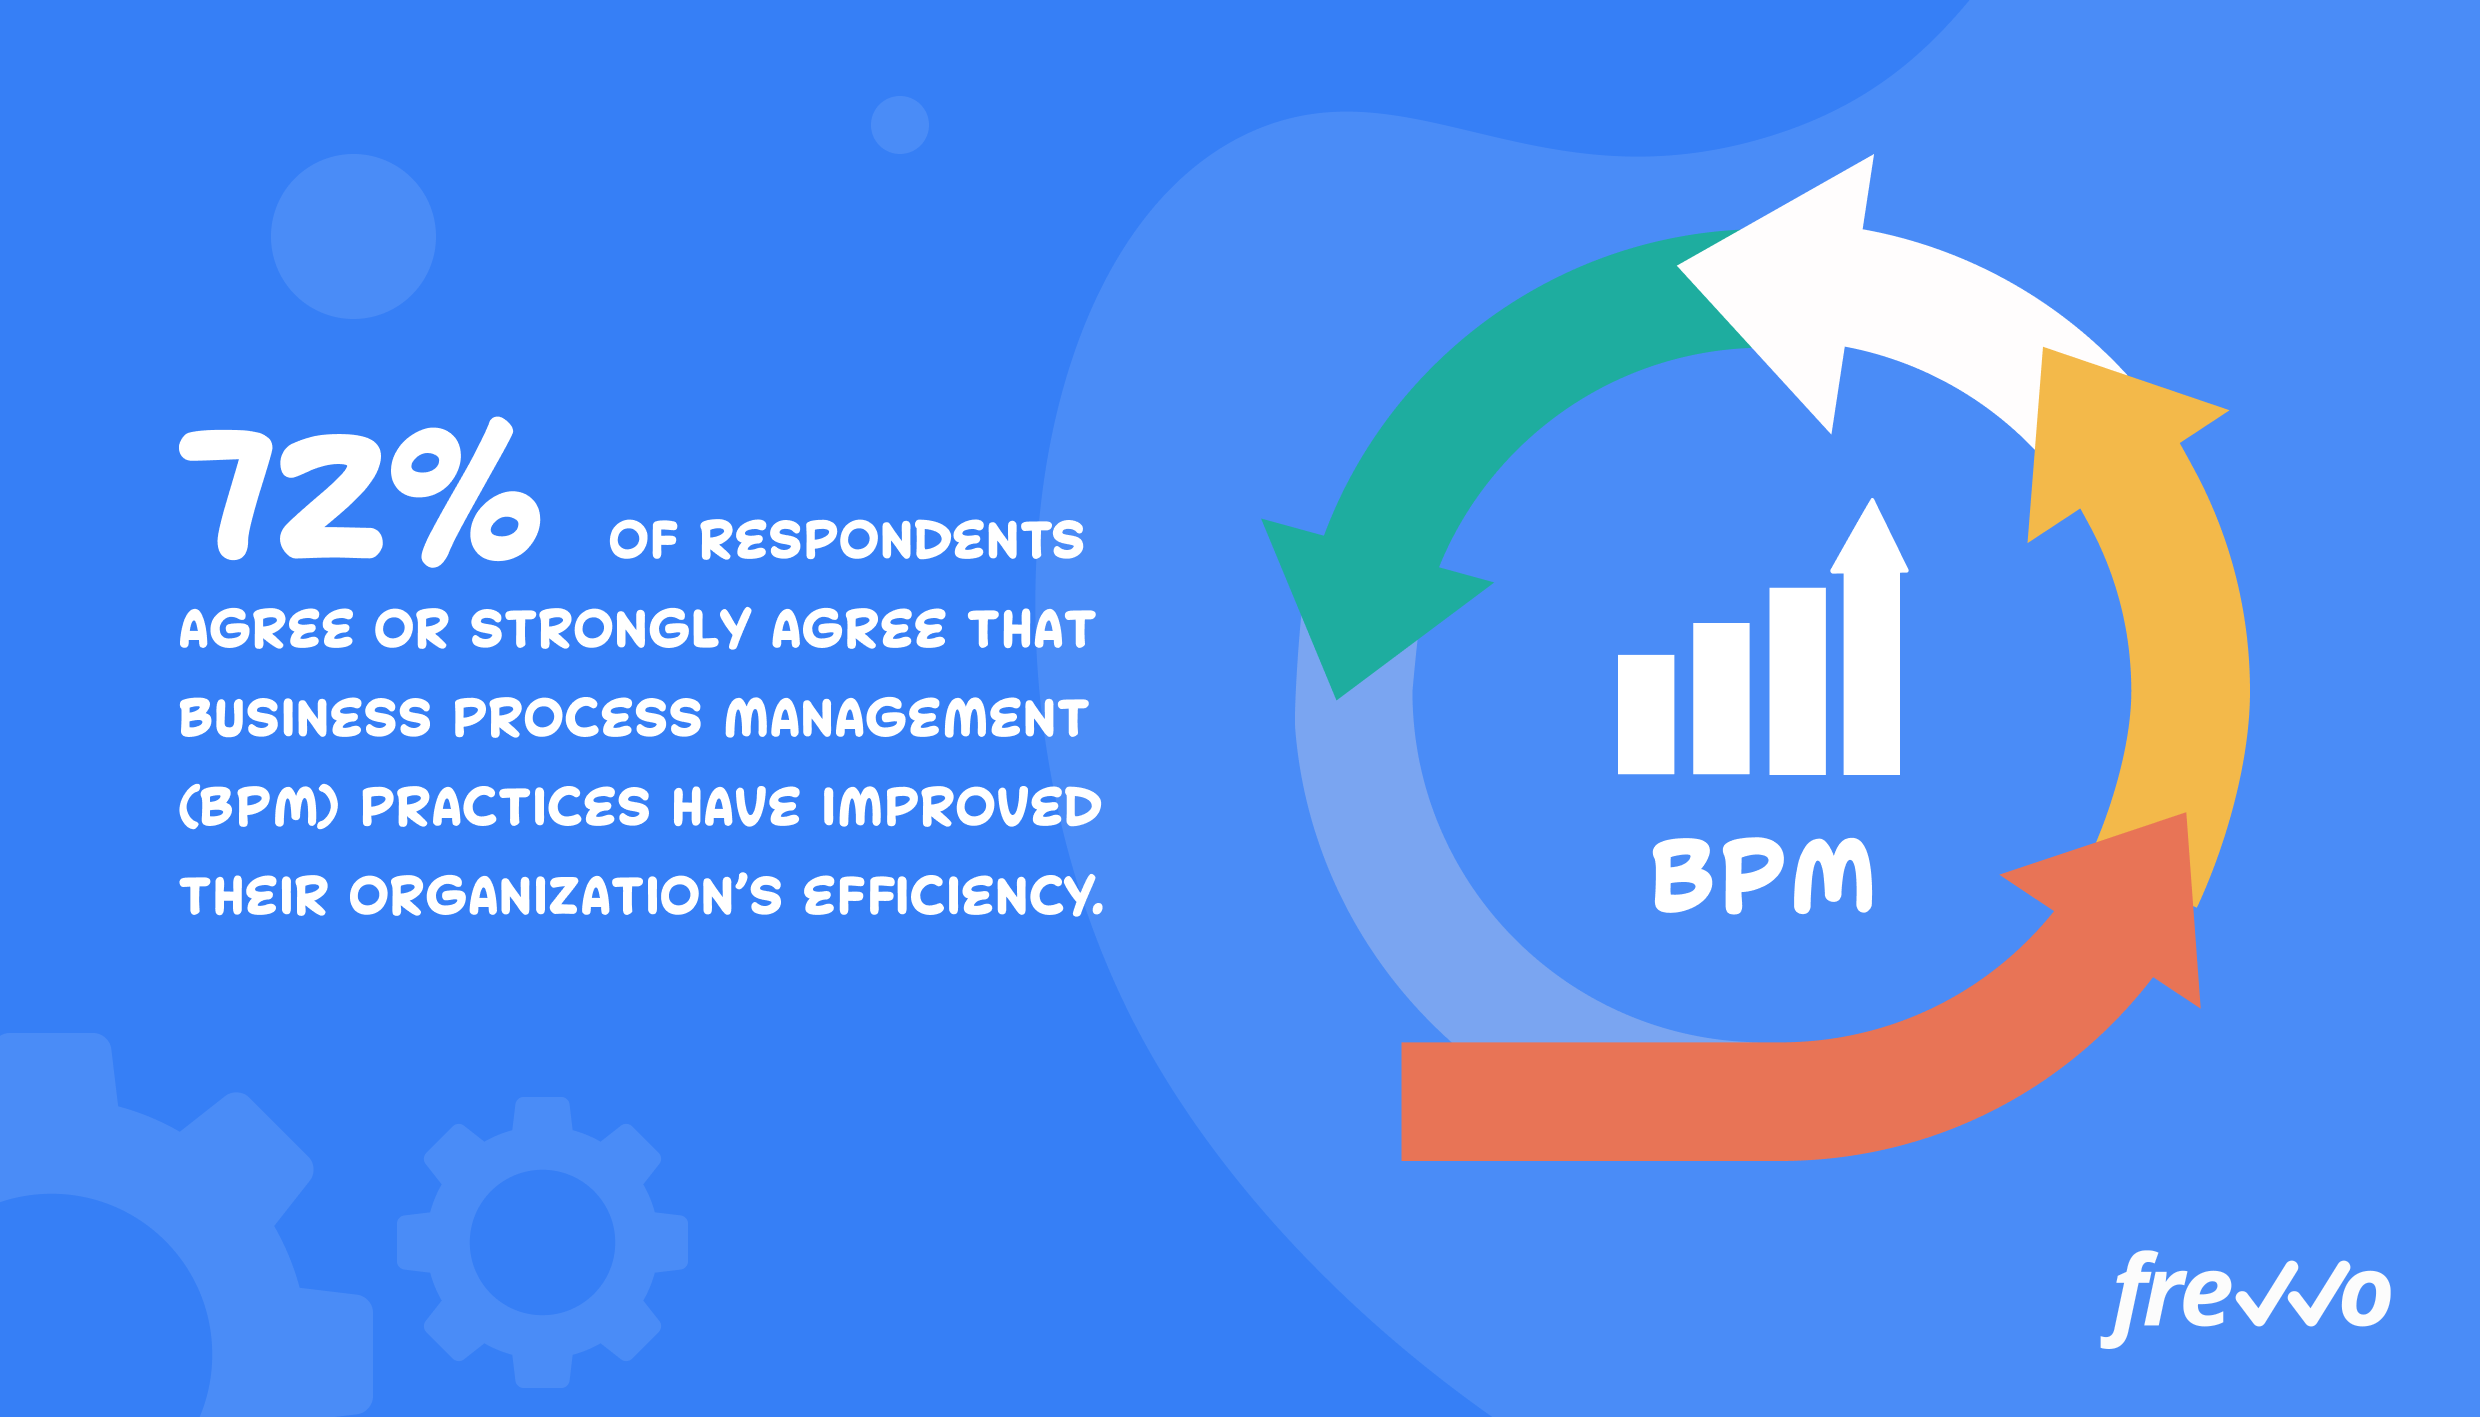 72% of respondents agree that business process management improves efficiency